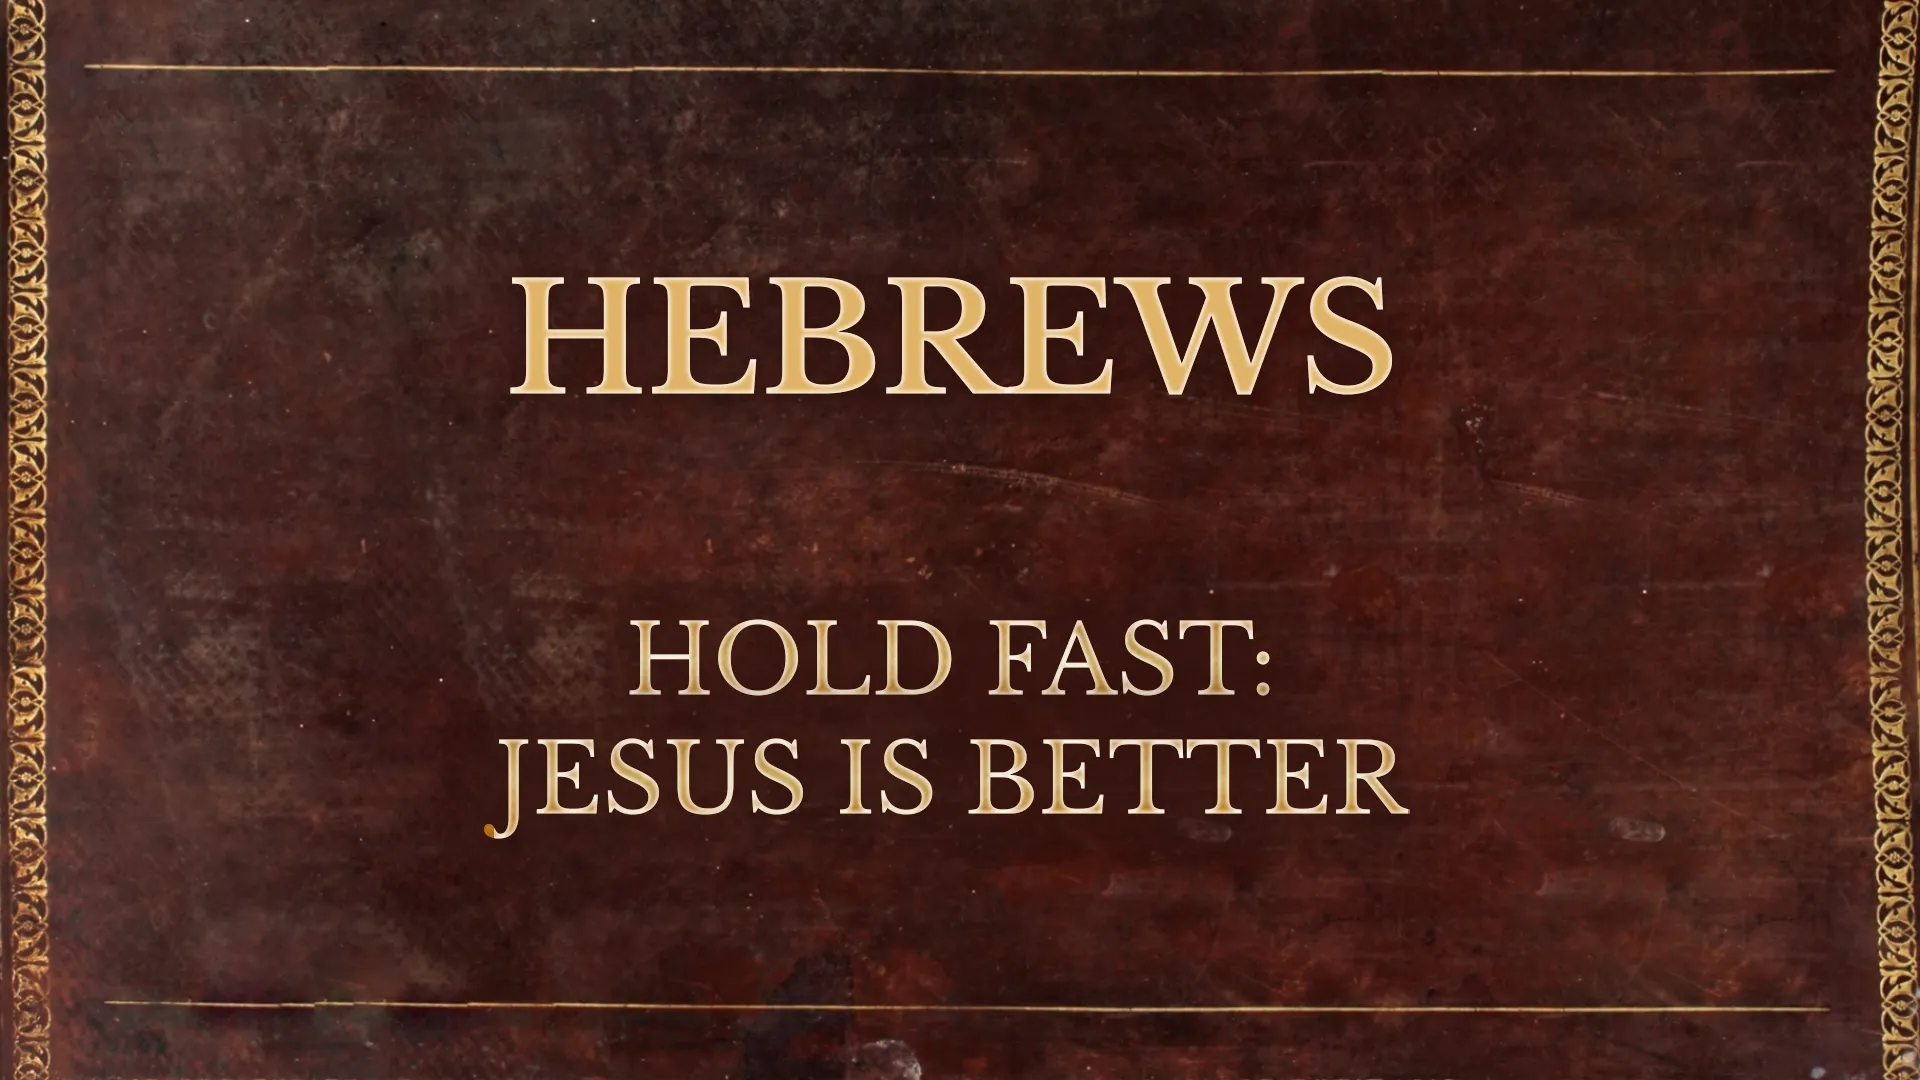 Hold Fast: Jesus Is Better